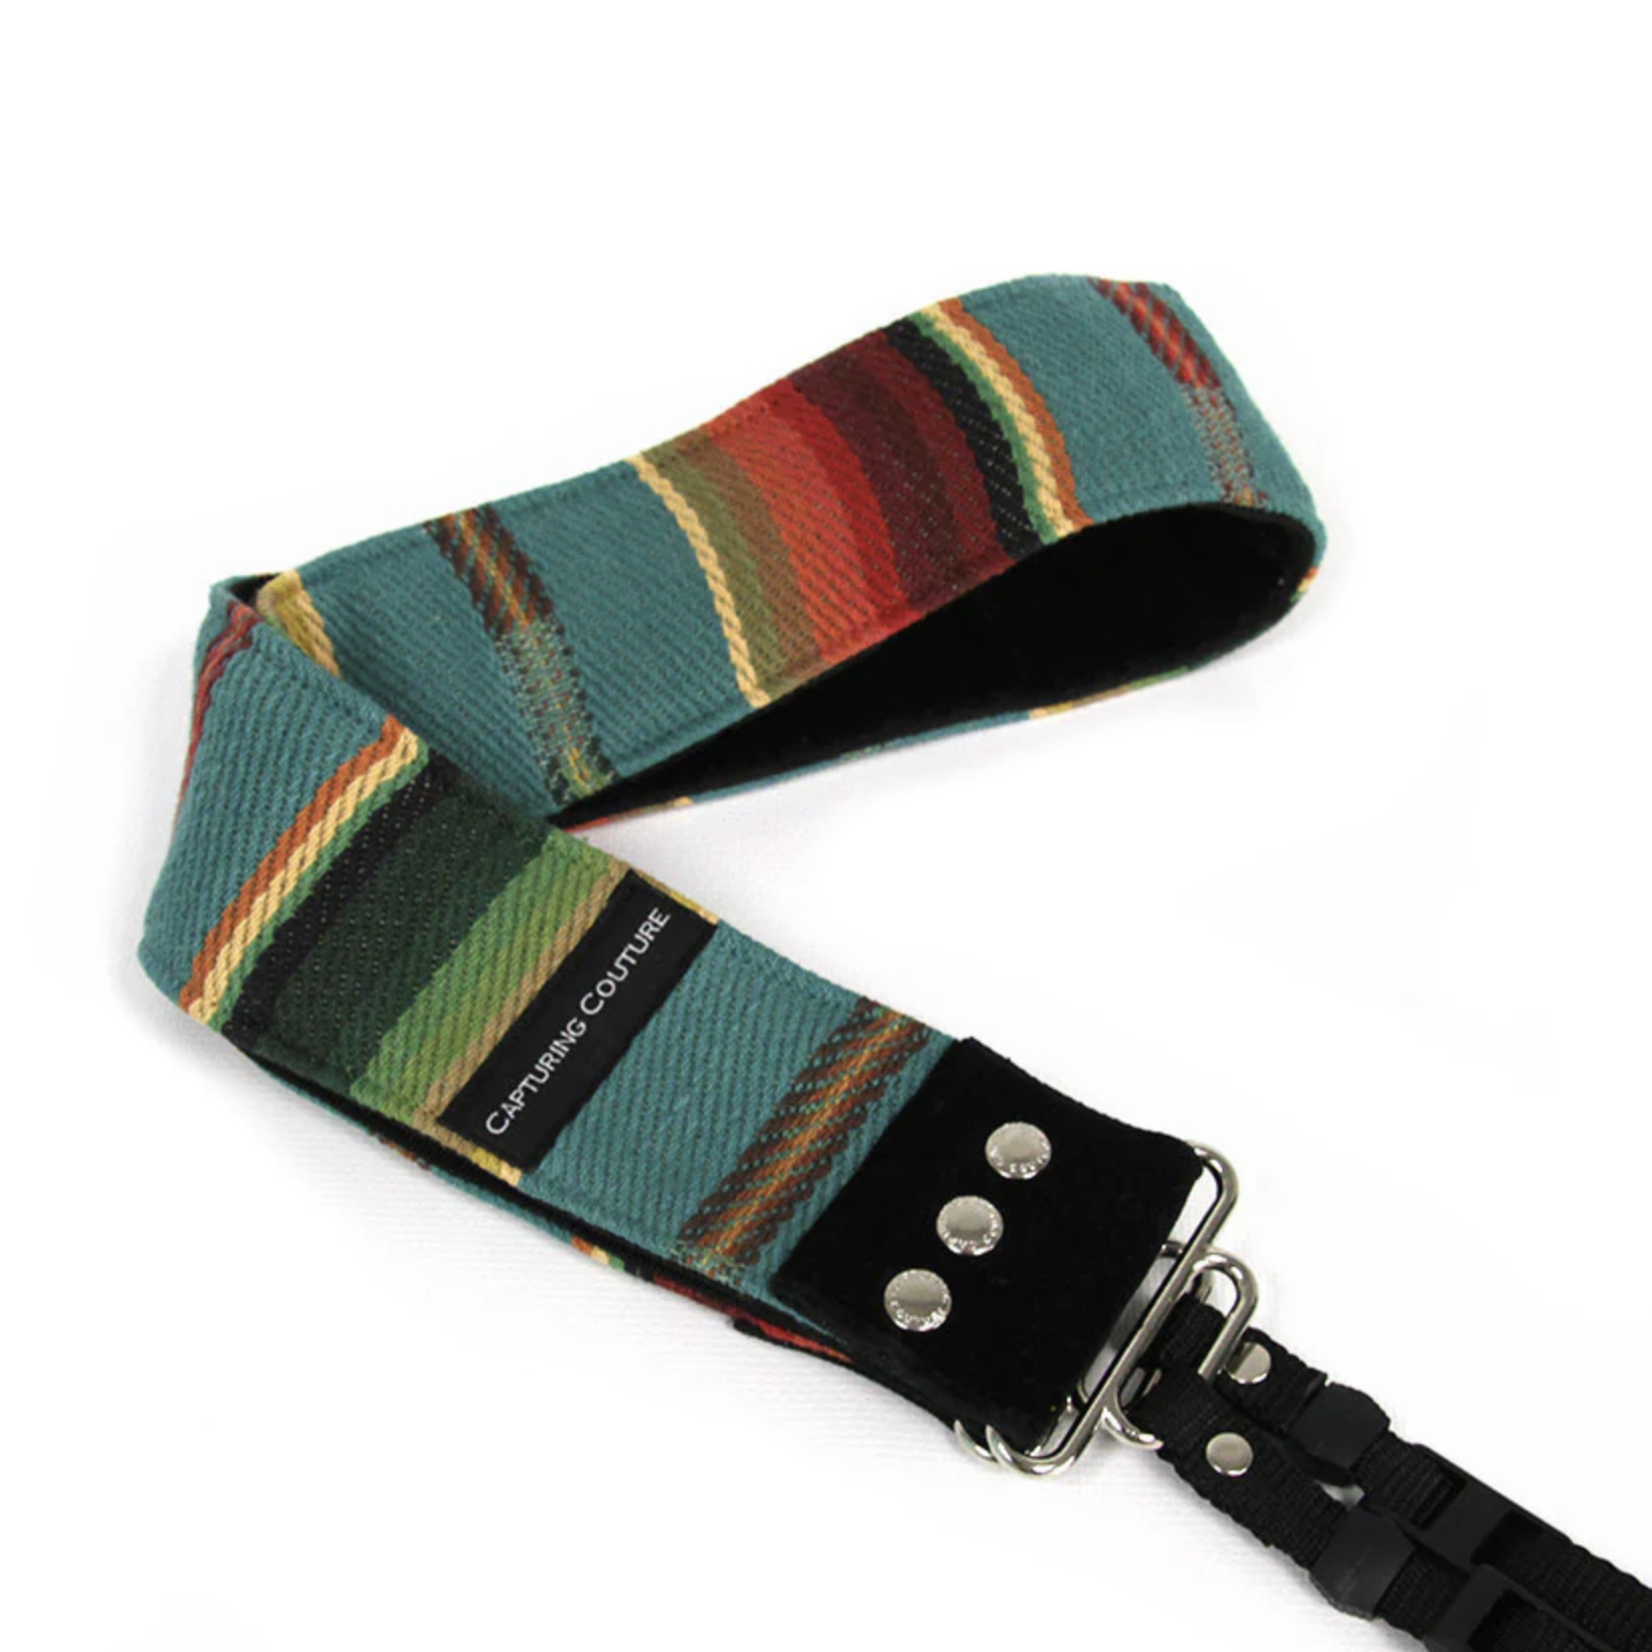 Capturing Couture Capturing Couture 2" Camera Strap - Dusty Road